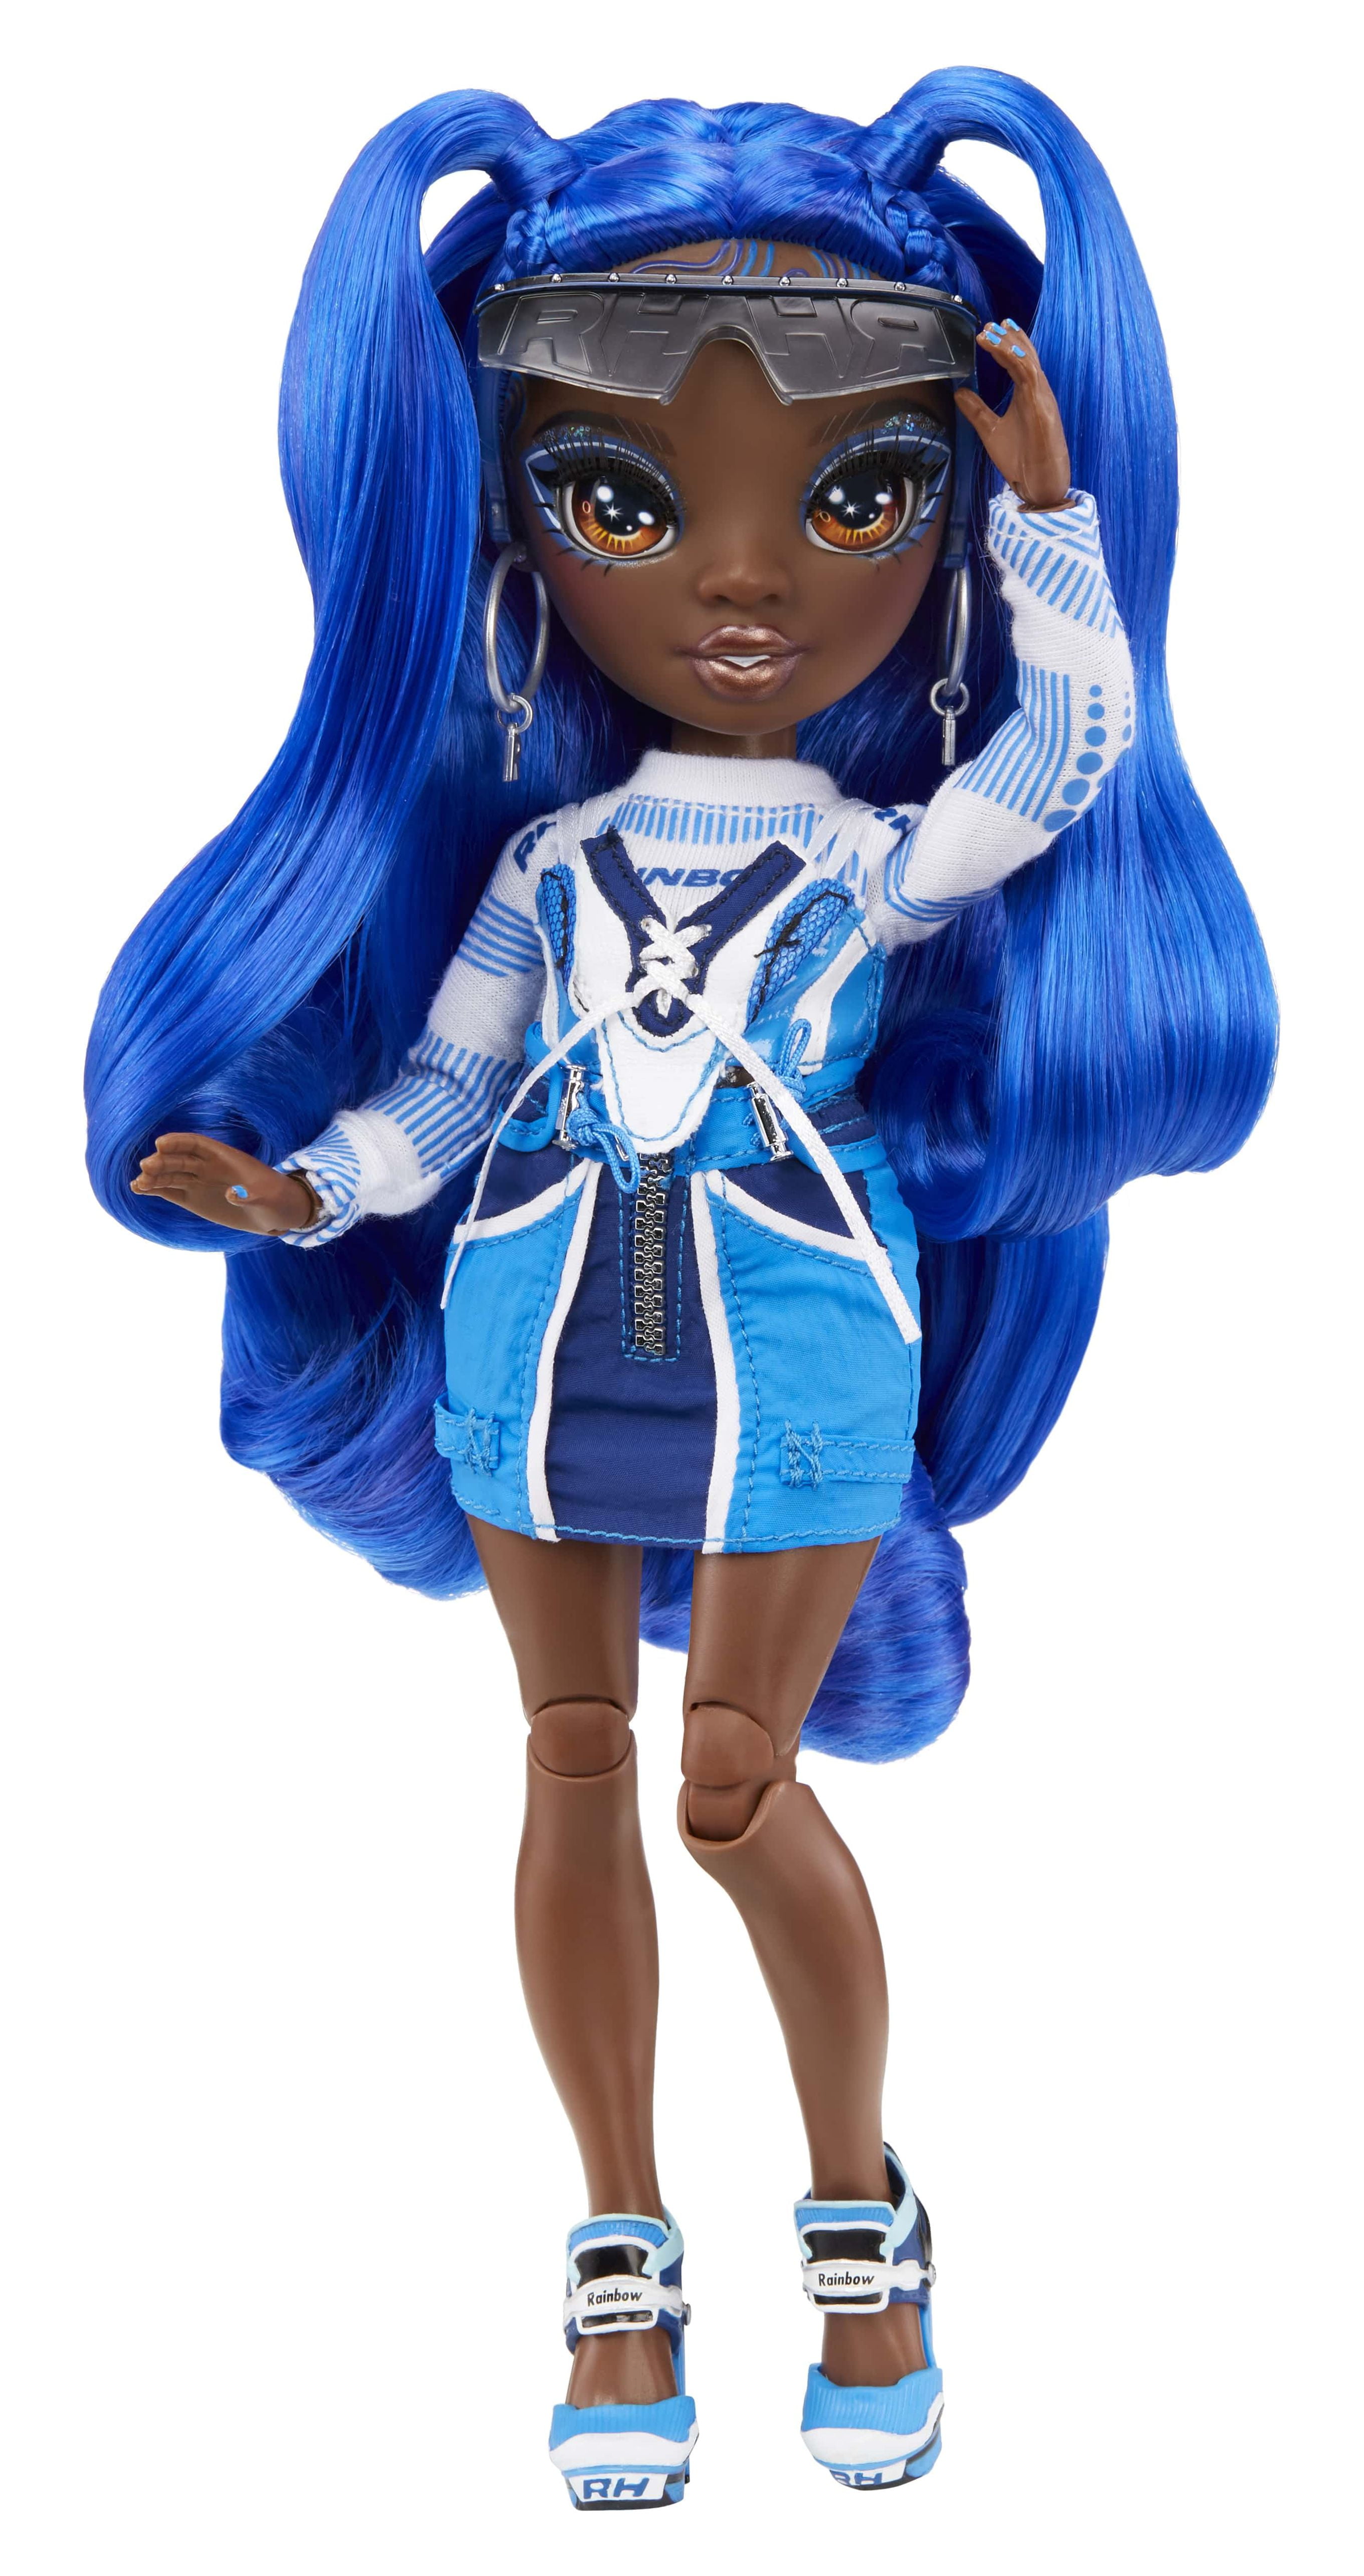 Mua Rainbow High Coco Vanderbalt- Cobalt Blue Fashion Doll. 2 Designer  Outfits to Mix & Match with Accessories, Great Gift for Kids 6-12 Years Old  and